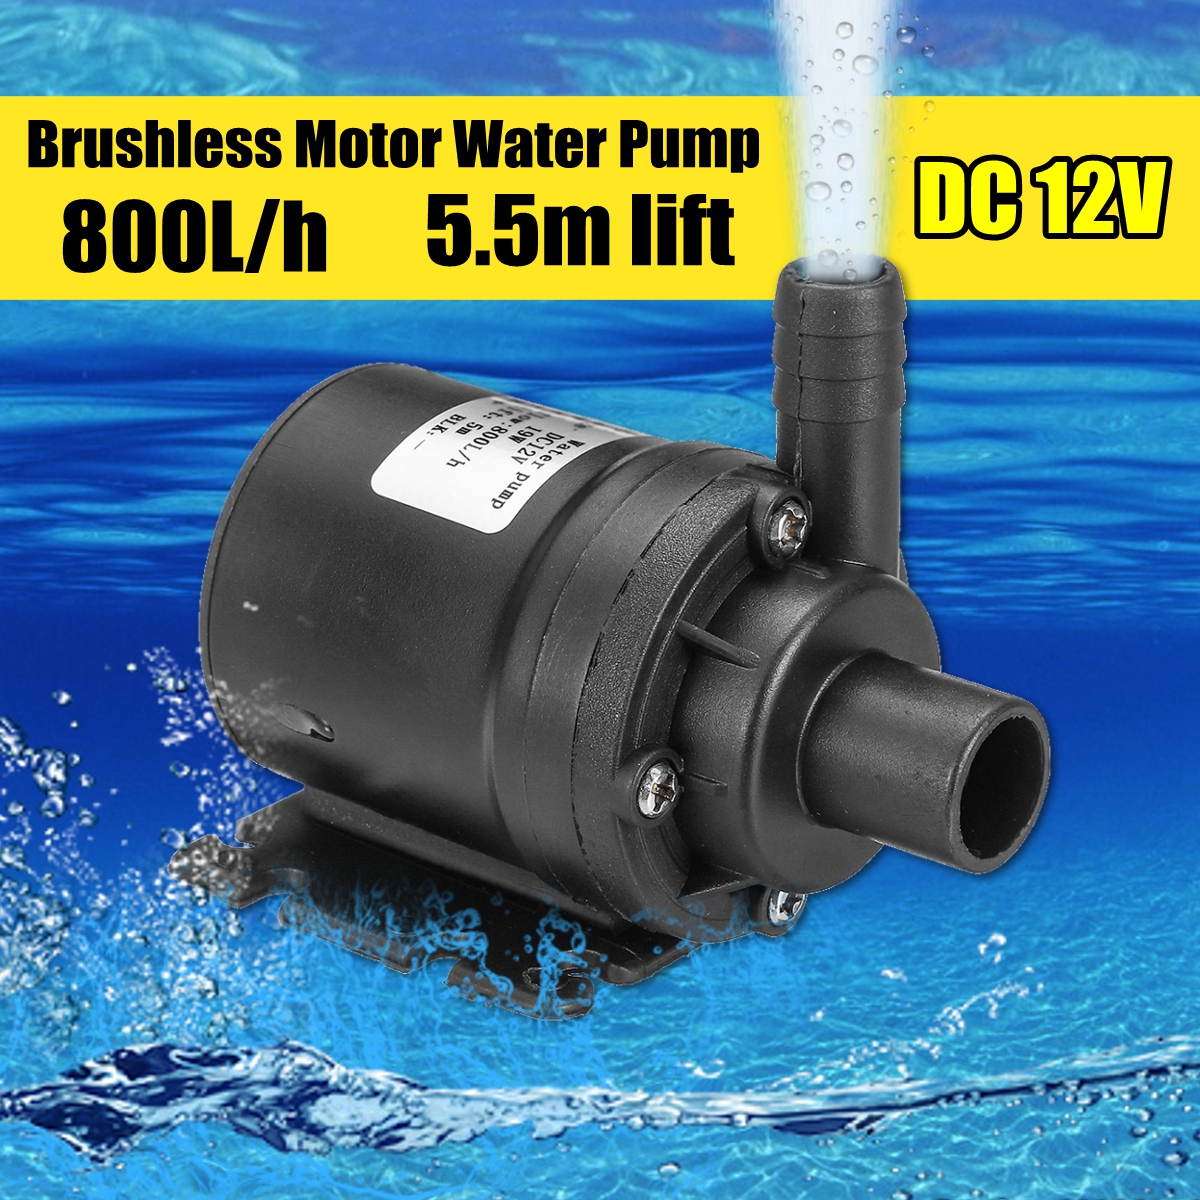 ZYW680-DC-12V-Water-Pump-Ultra-Quiet-Mini-55m-Lift-Brushless-Motor-Submersible-Water-Pump-1531599-1